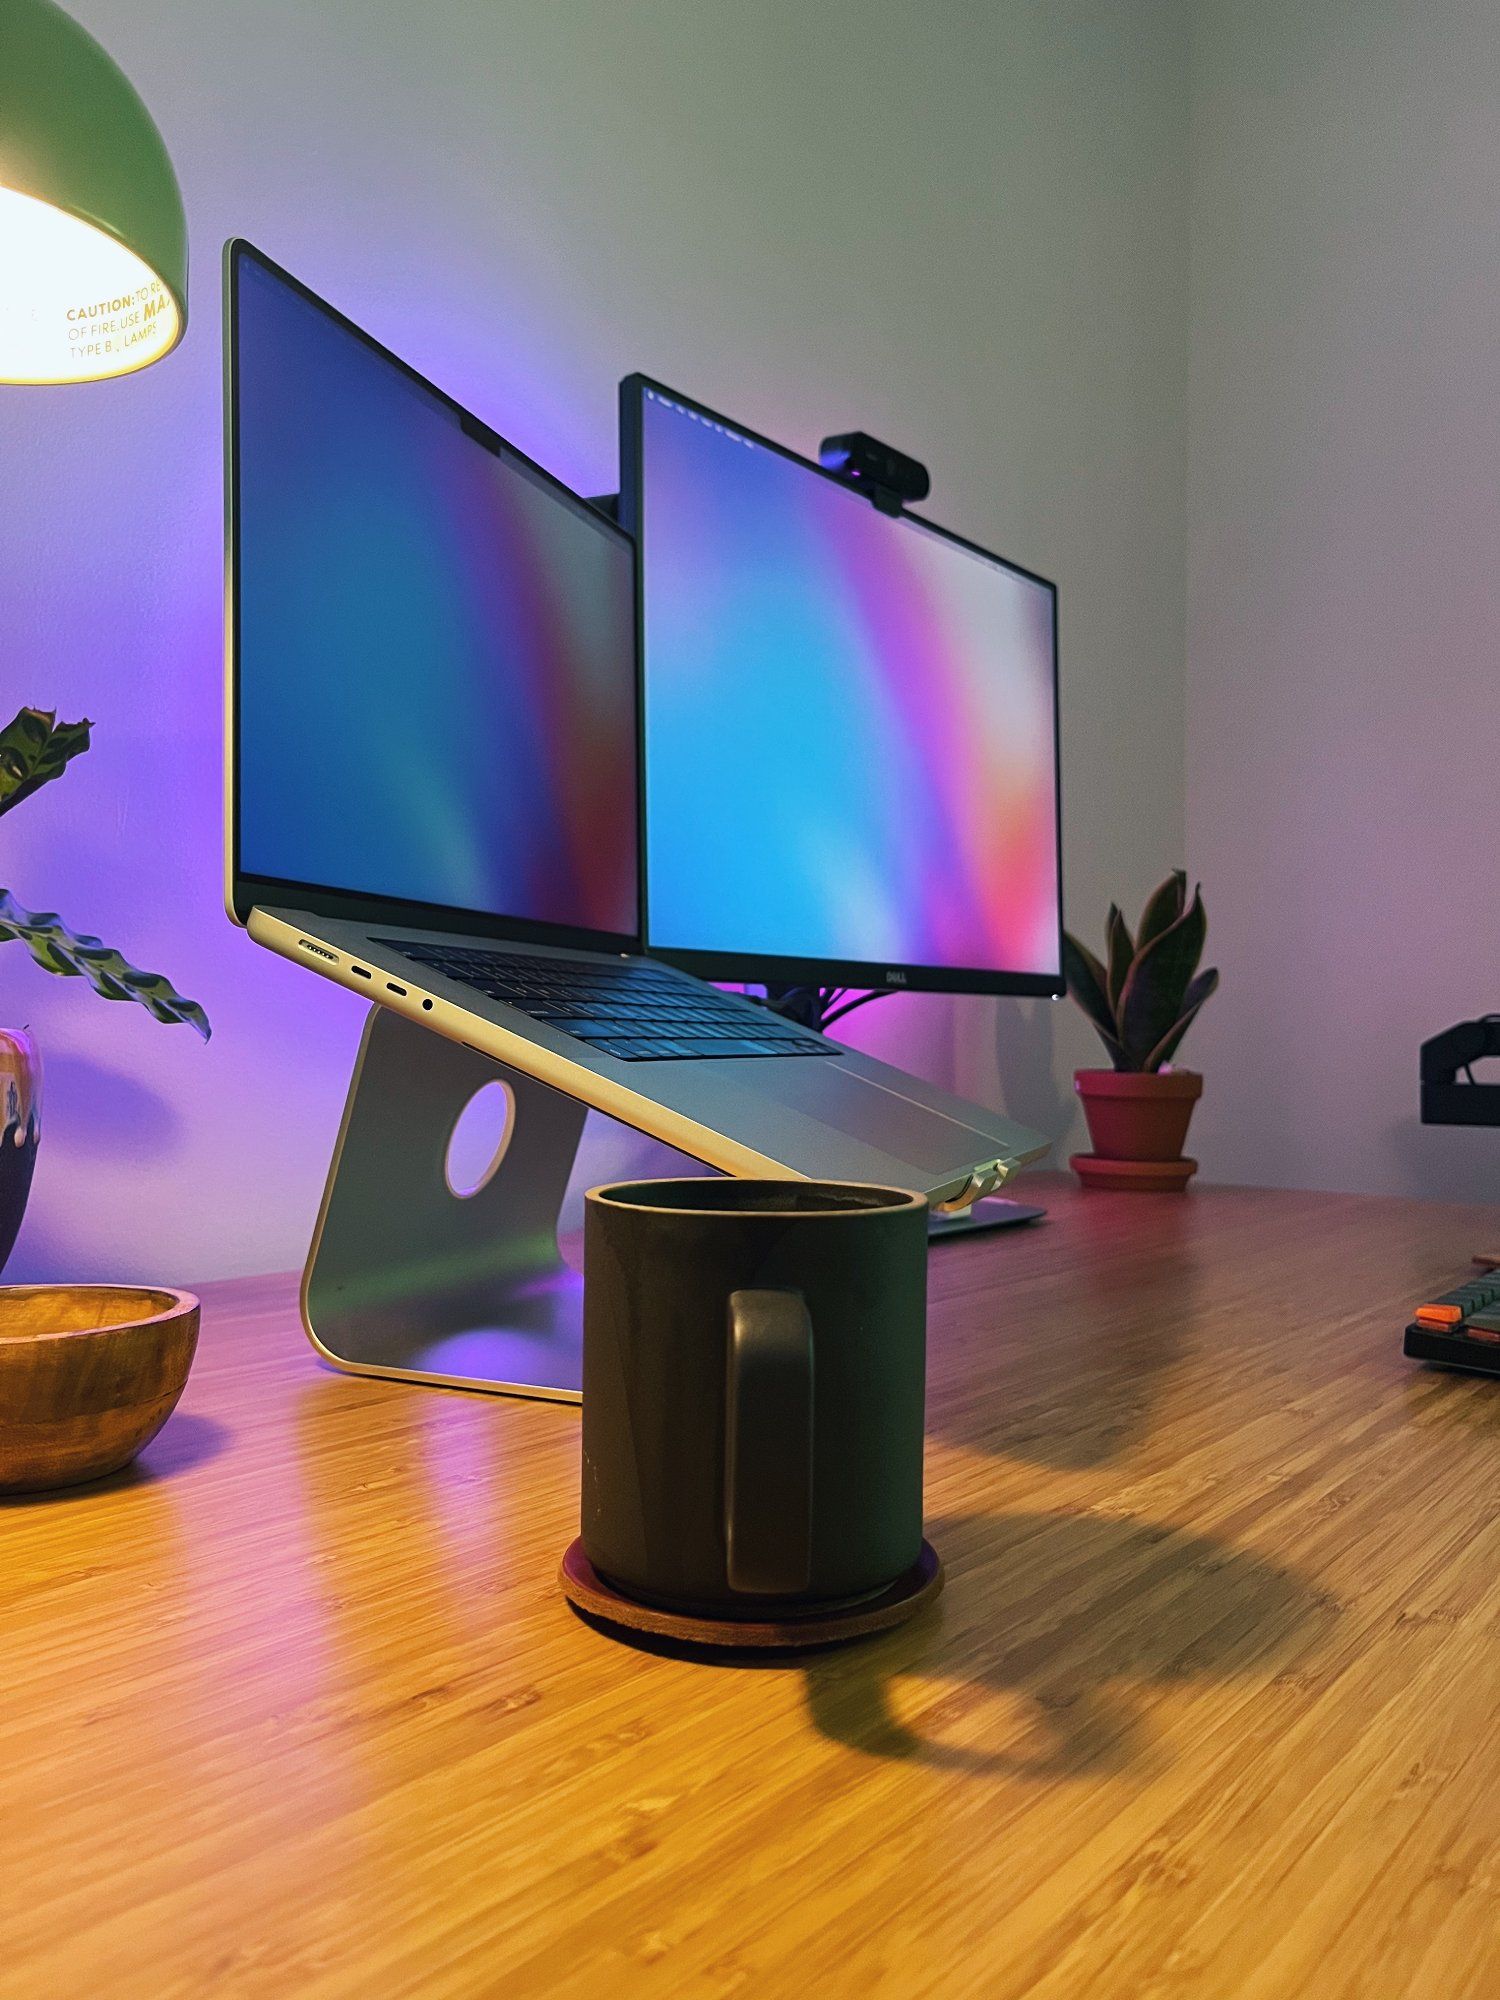 A desk setup shot from the left side with a mug in the foreground and a laptop, a monitor and a houseplant in the background